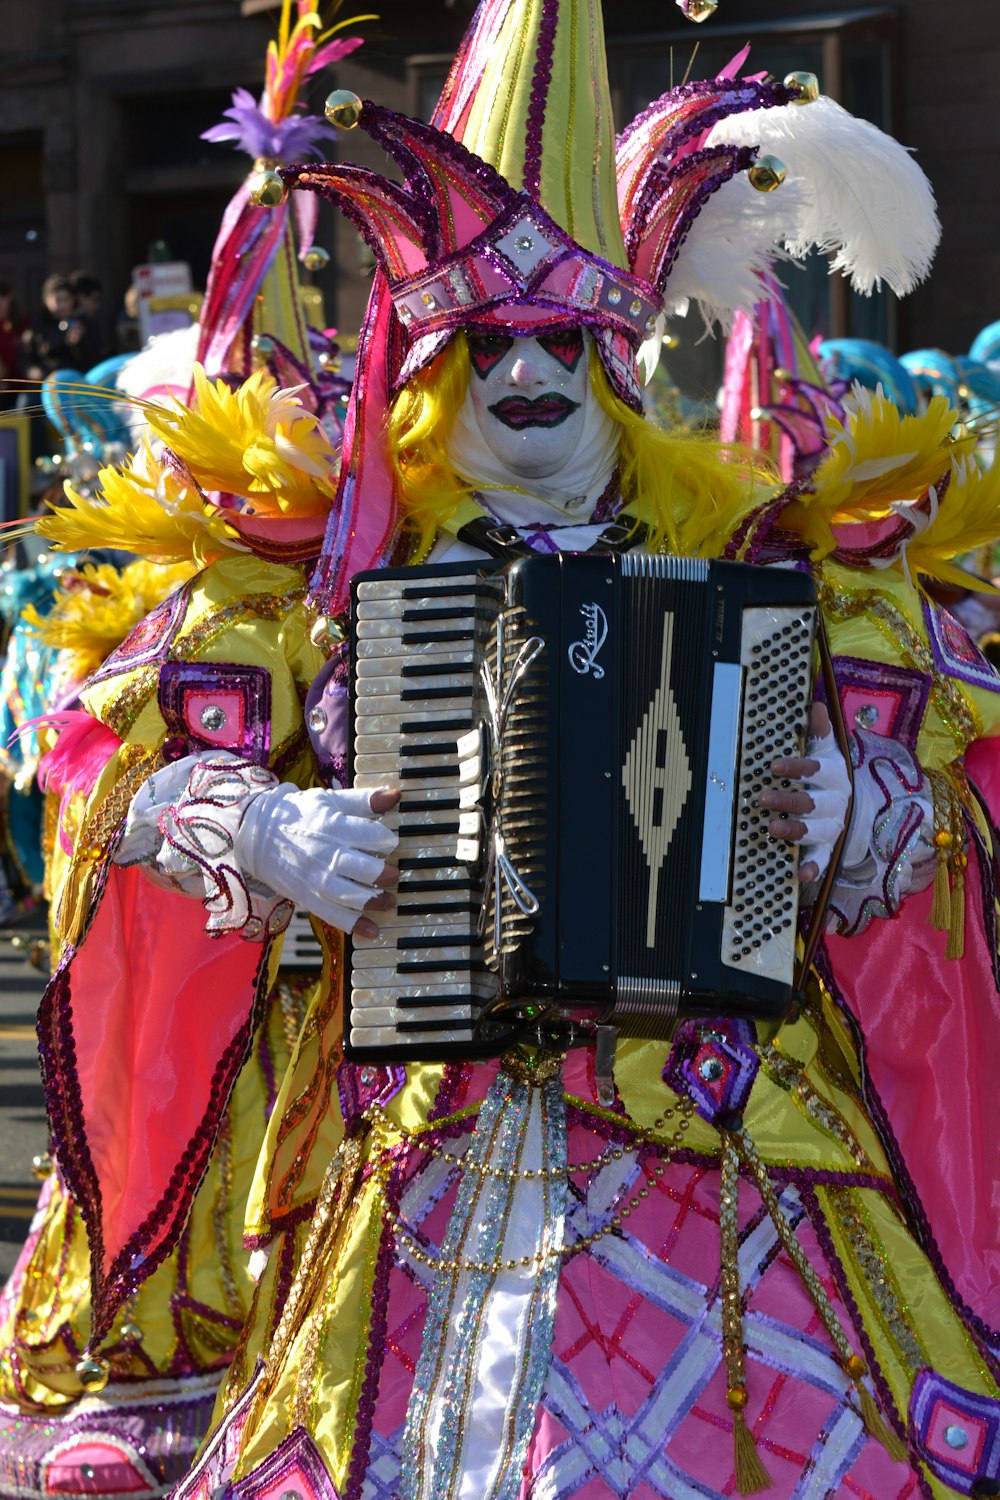 person in yellow and red costume playing black and white electric keyboard